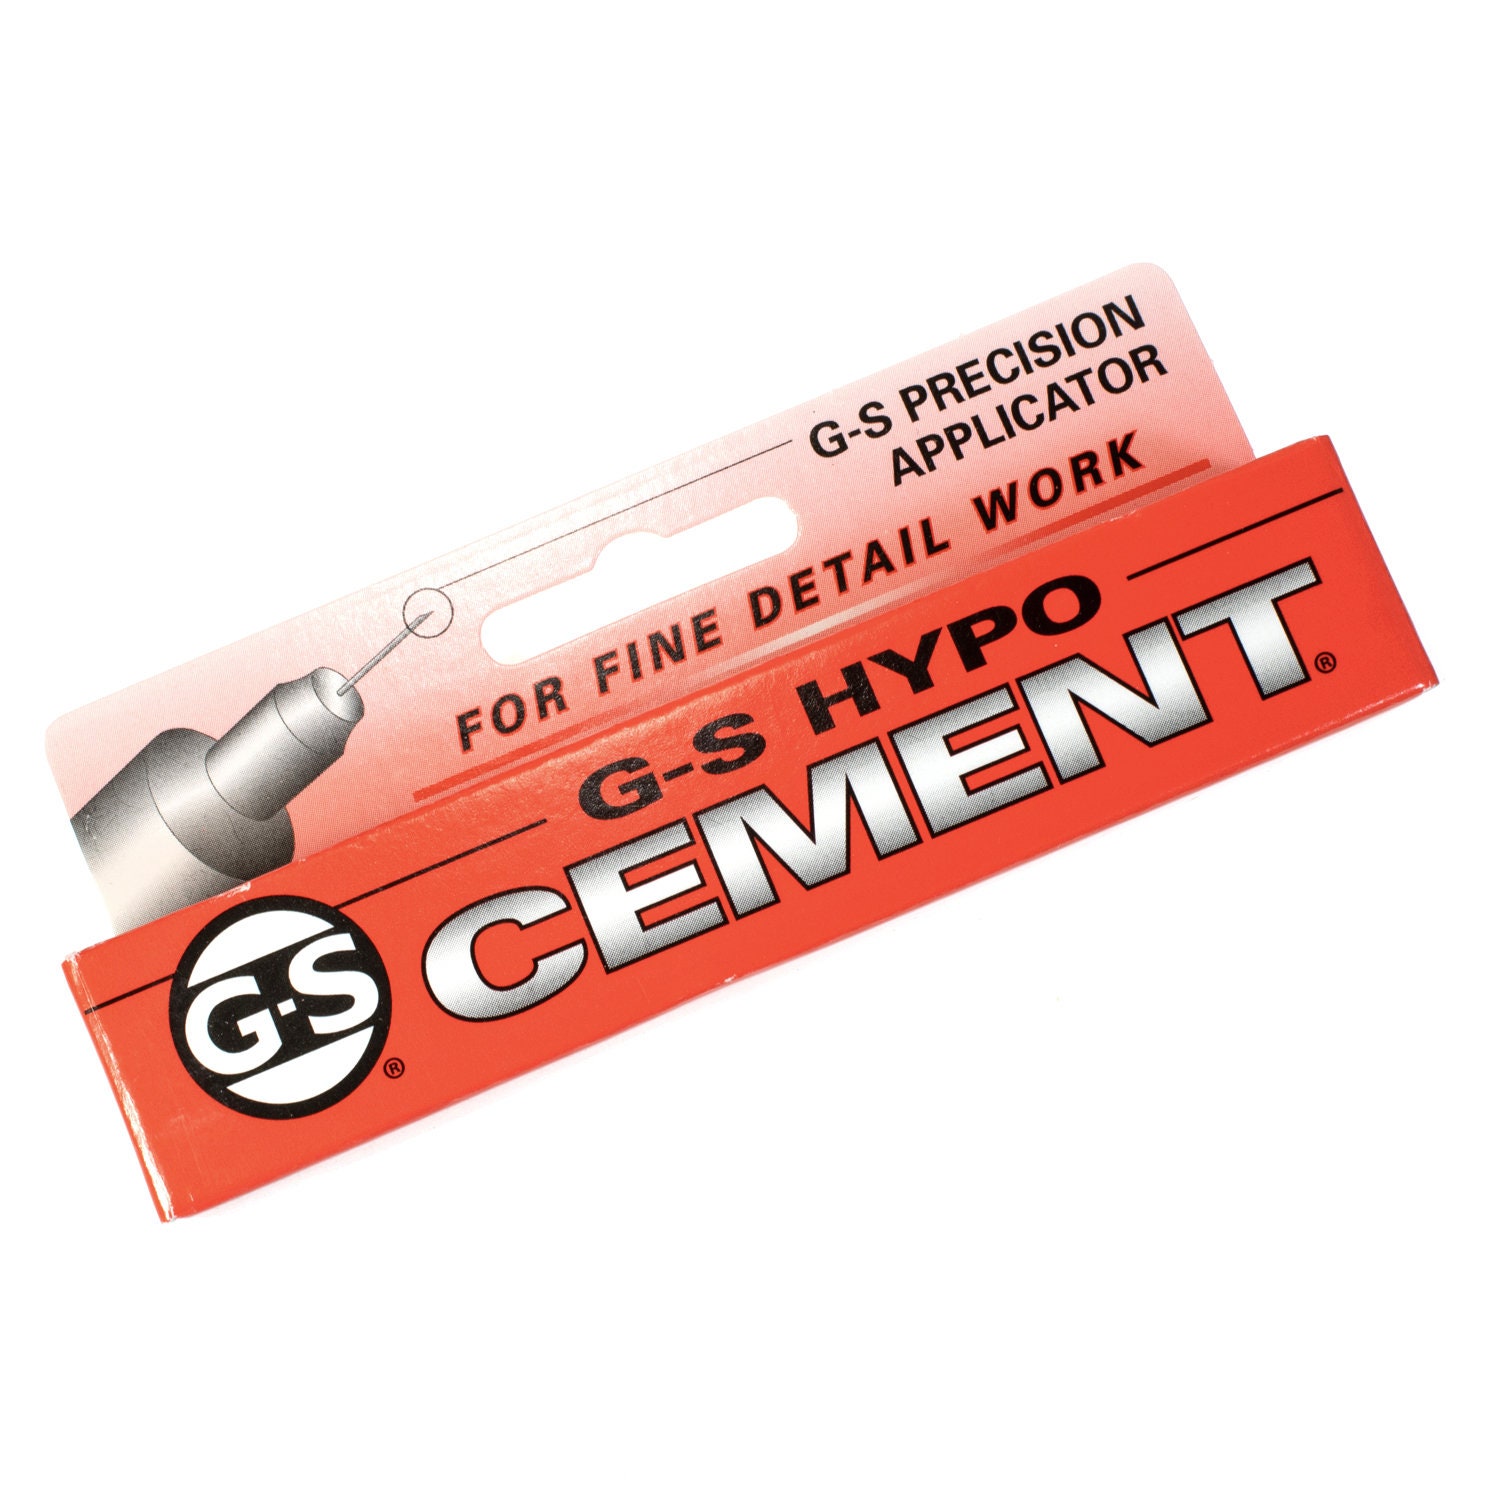 G-S Hypo Cement Craft Glue Watch Crystal Jewelry Adhesive 1/3 oz GS 